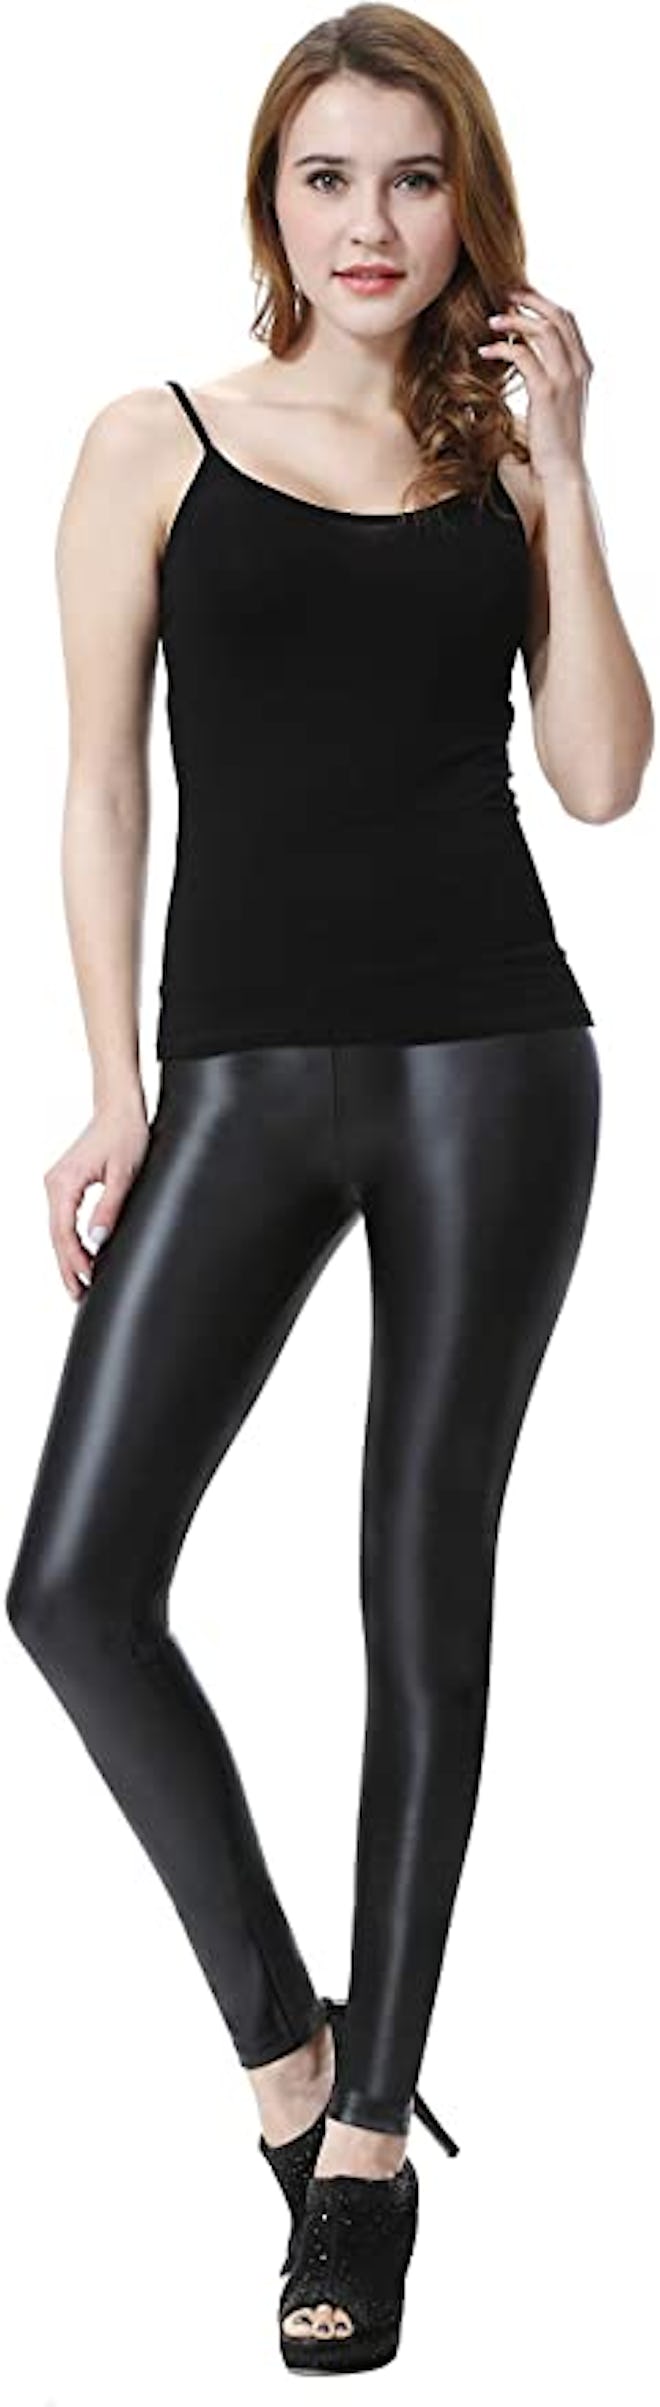 Everbellus Sexy Faux Leather High Waisted Leggings